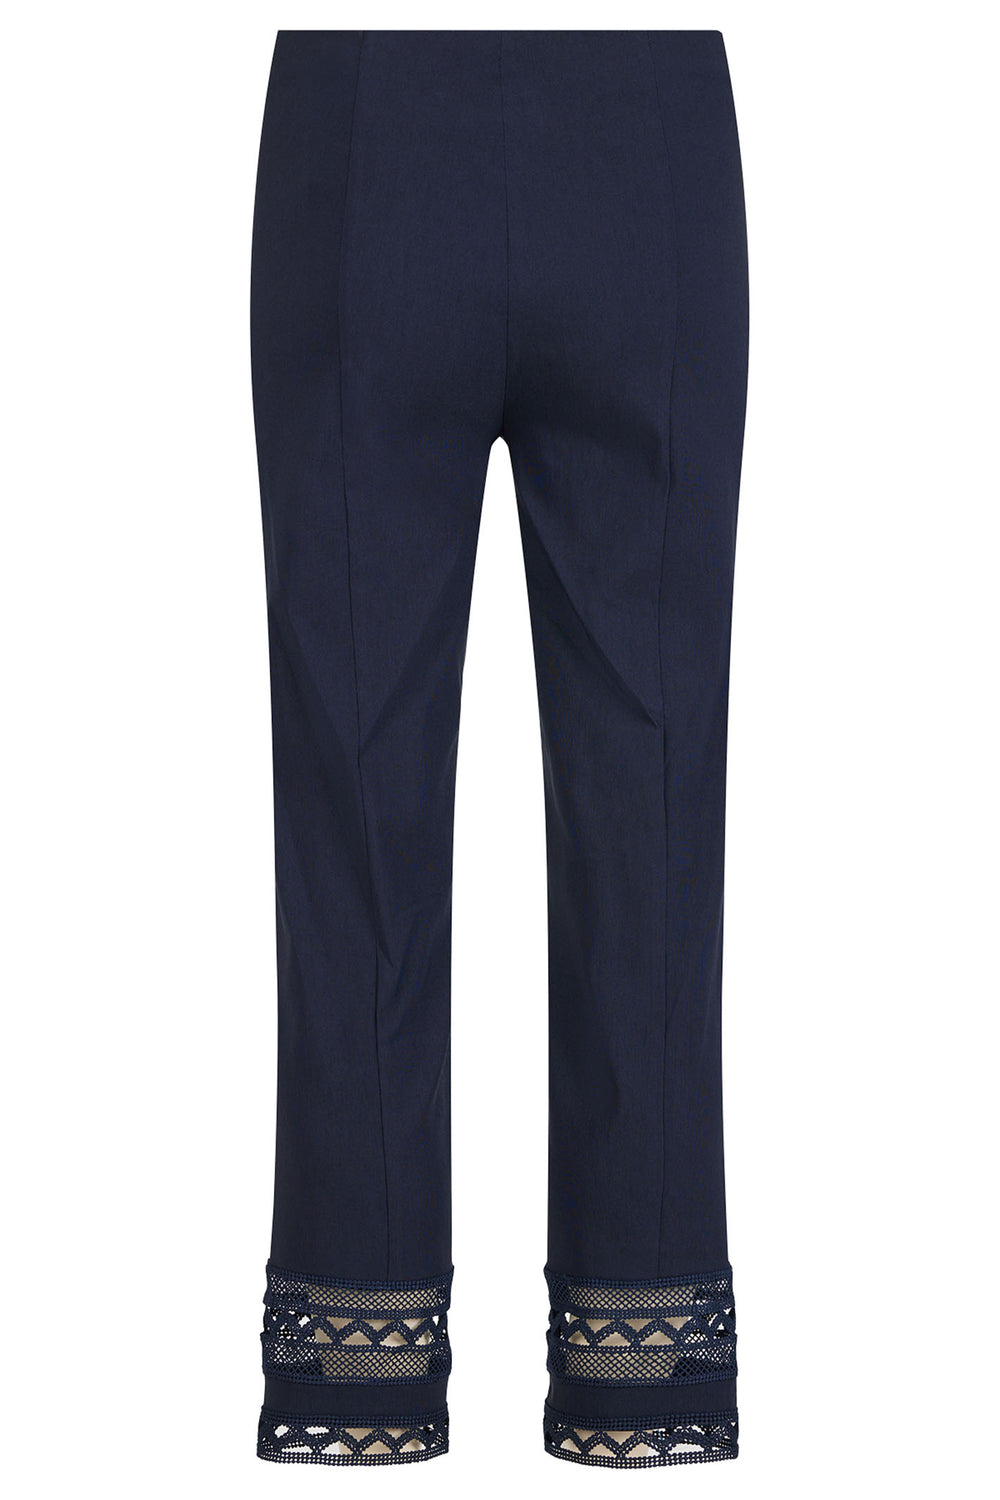 Robell Marie 09 53489 5499 69 Navy Ankle Detail Trousers 68cm - Dotique